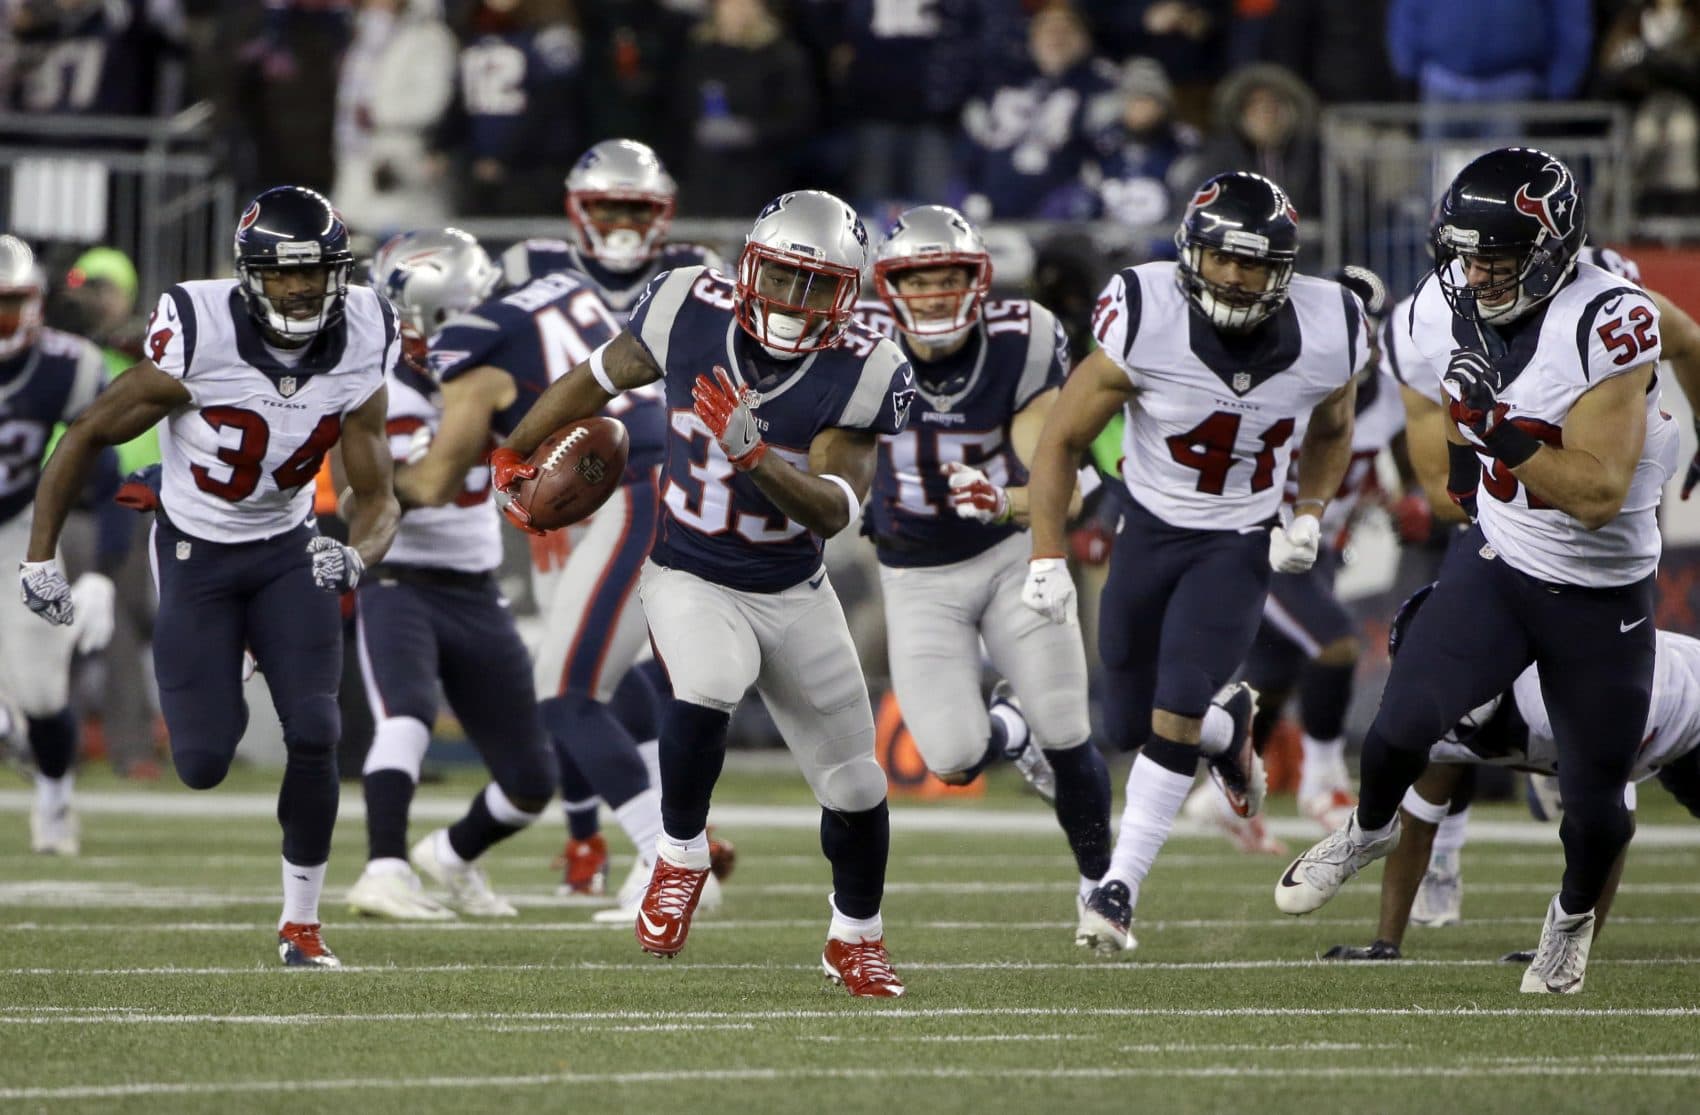 New England Patriots running back Dion Lewis runs for a touchdown against the Houston Texans during the first half of Saturday's AFC divisional playoff game at Gillette Stadium. (Elise Amendola/AP)